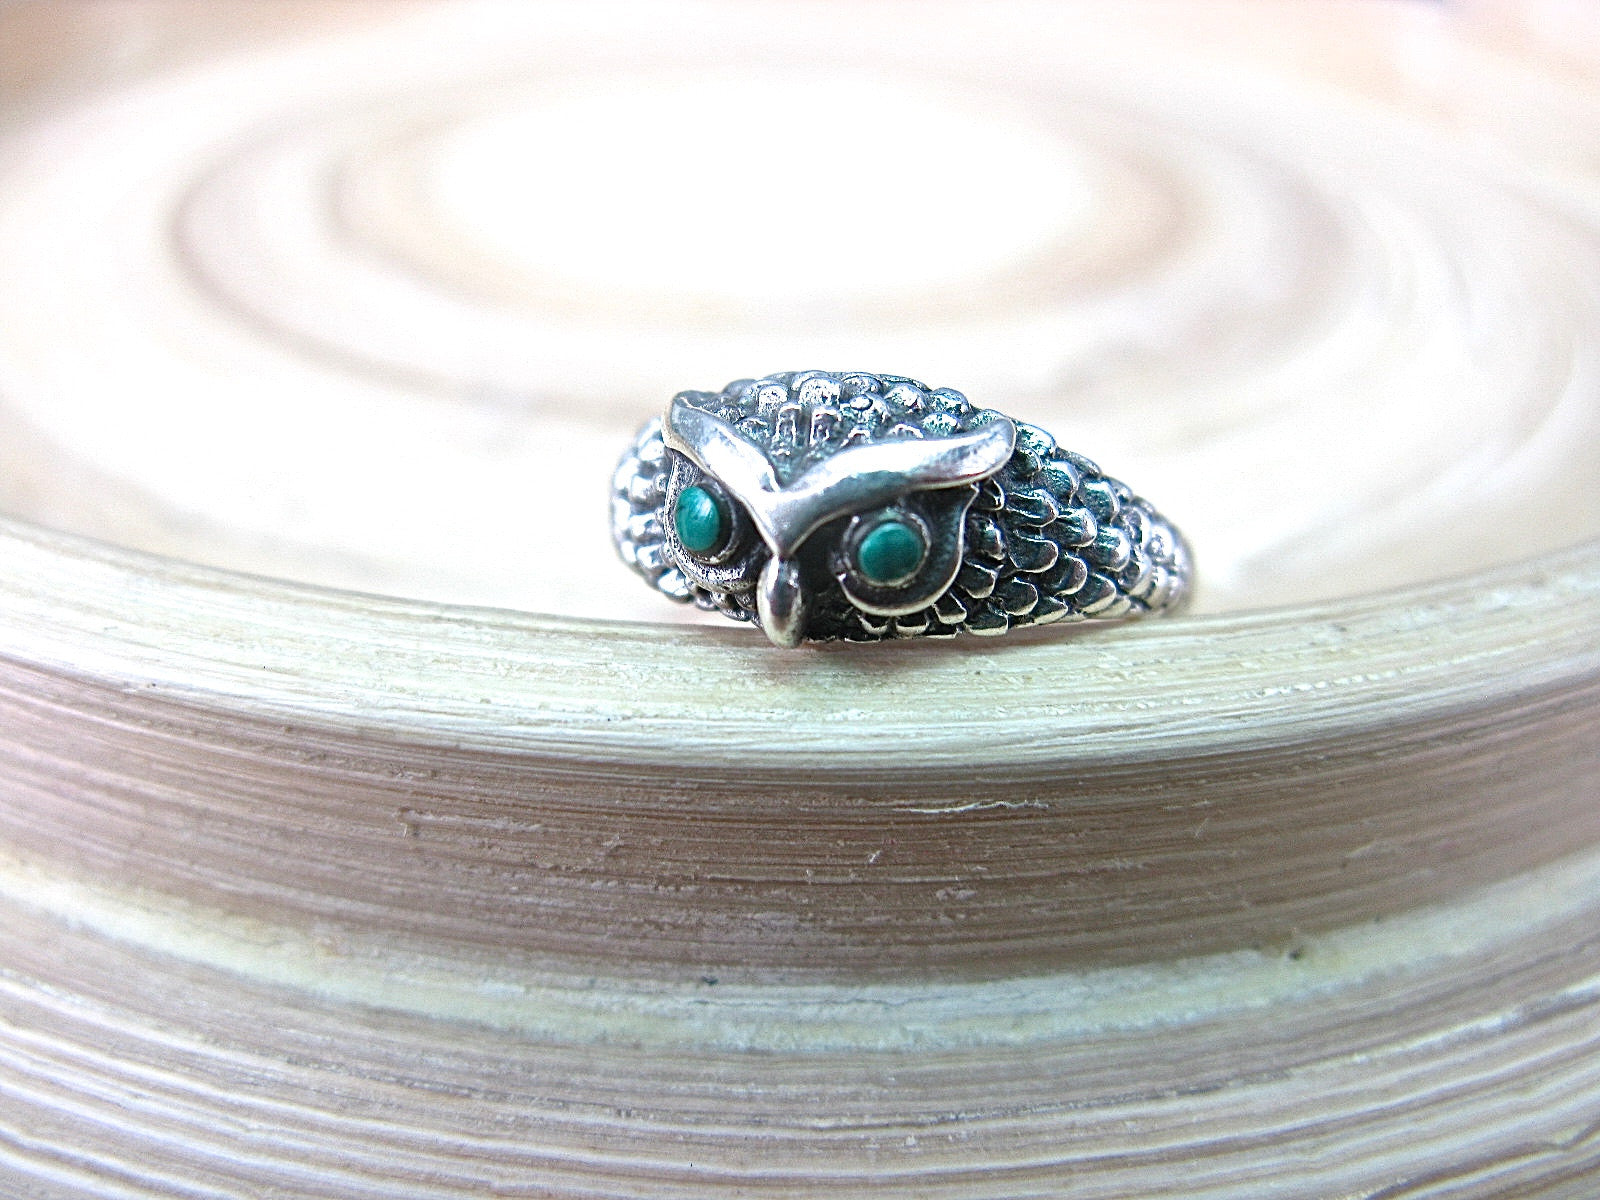 Owl Ring Turquoise in 925 Sterling Silver Ring Faith Owl - Faith Owl